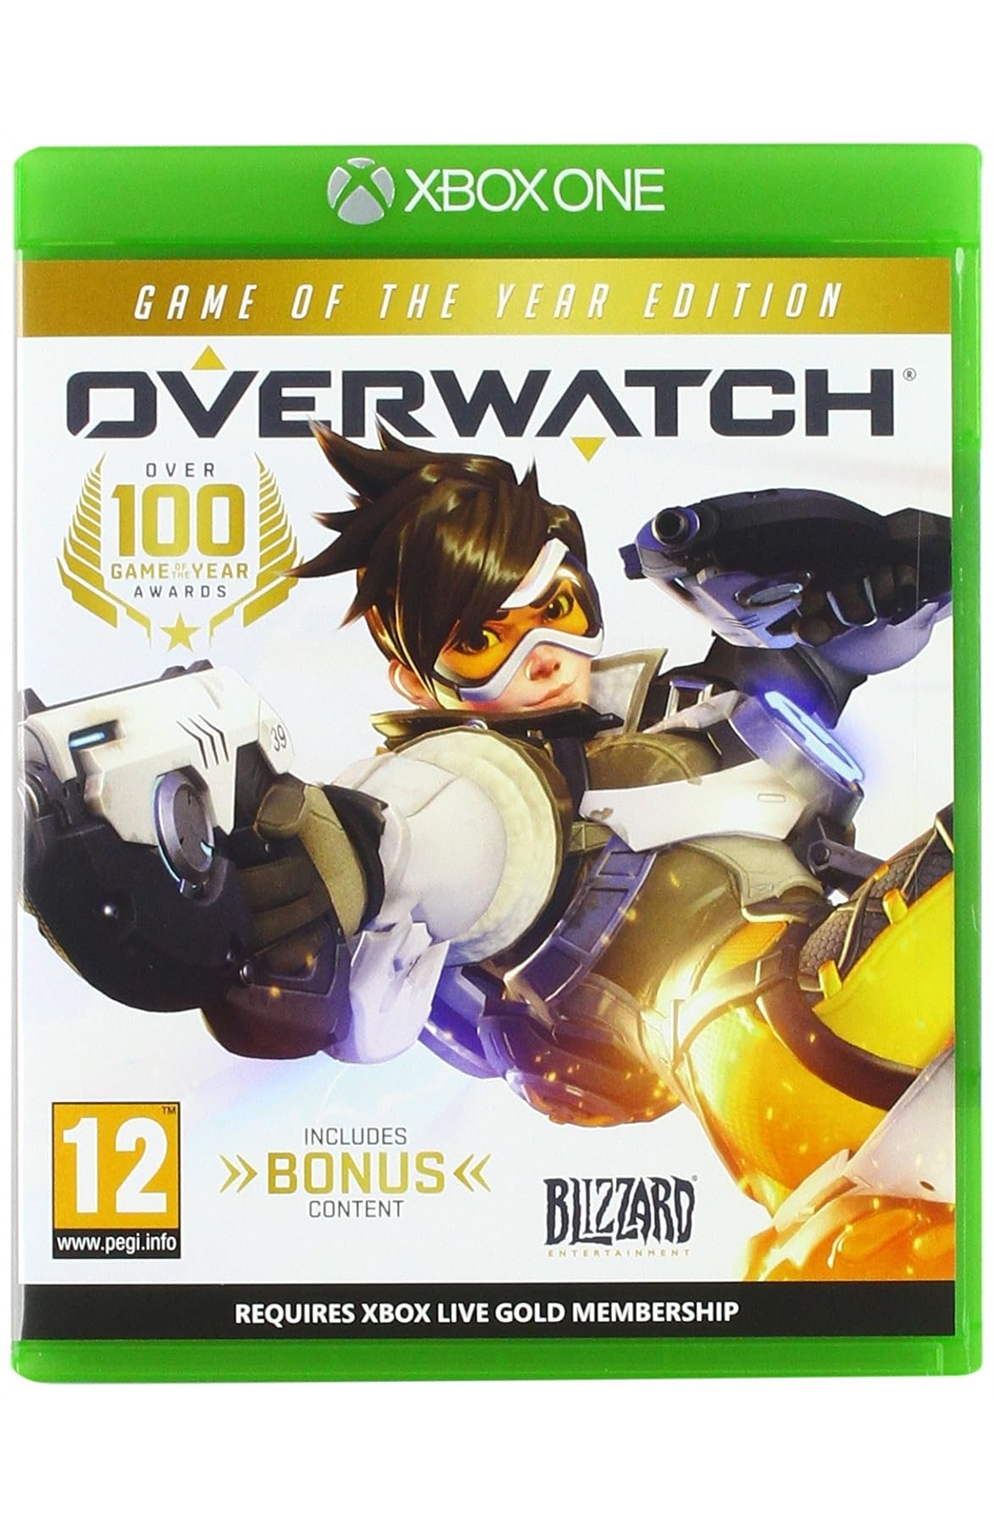 Xbox One Xb1 Overwatch- Game of The Year Edition